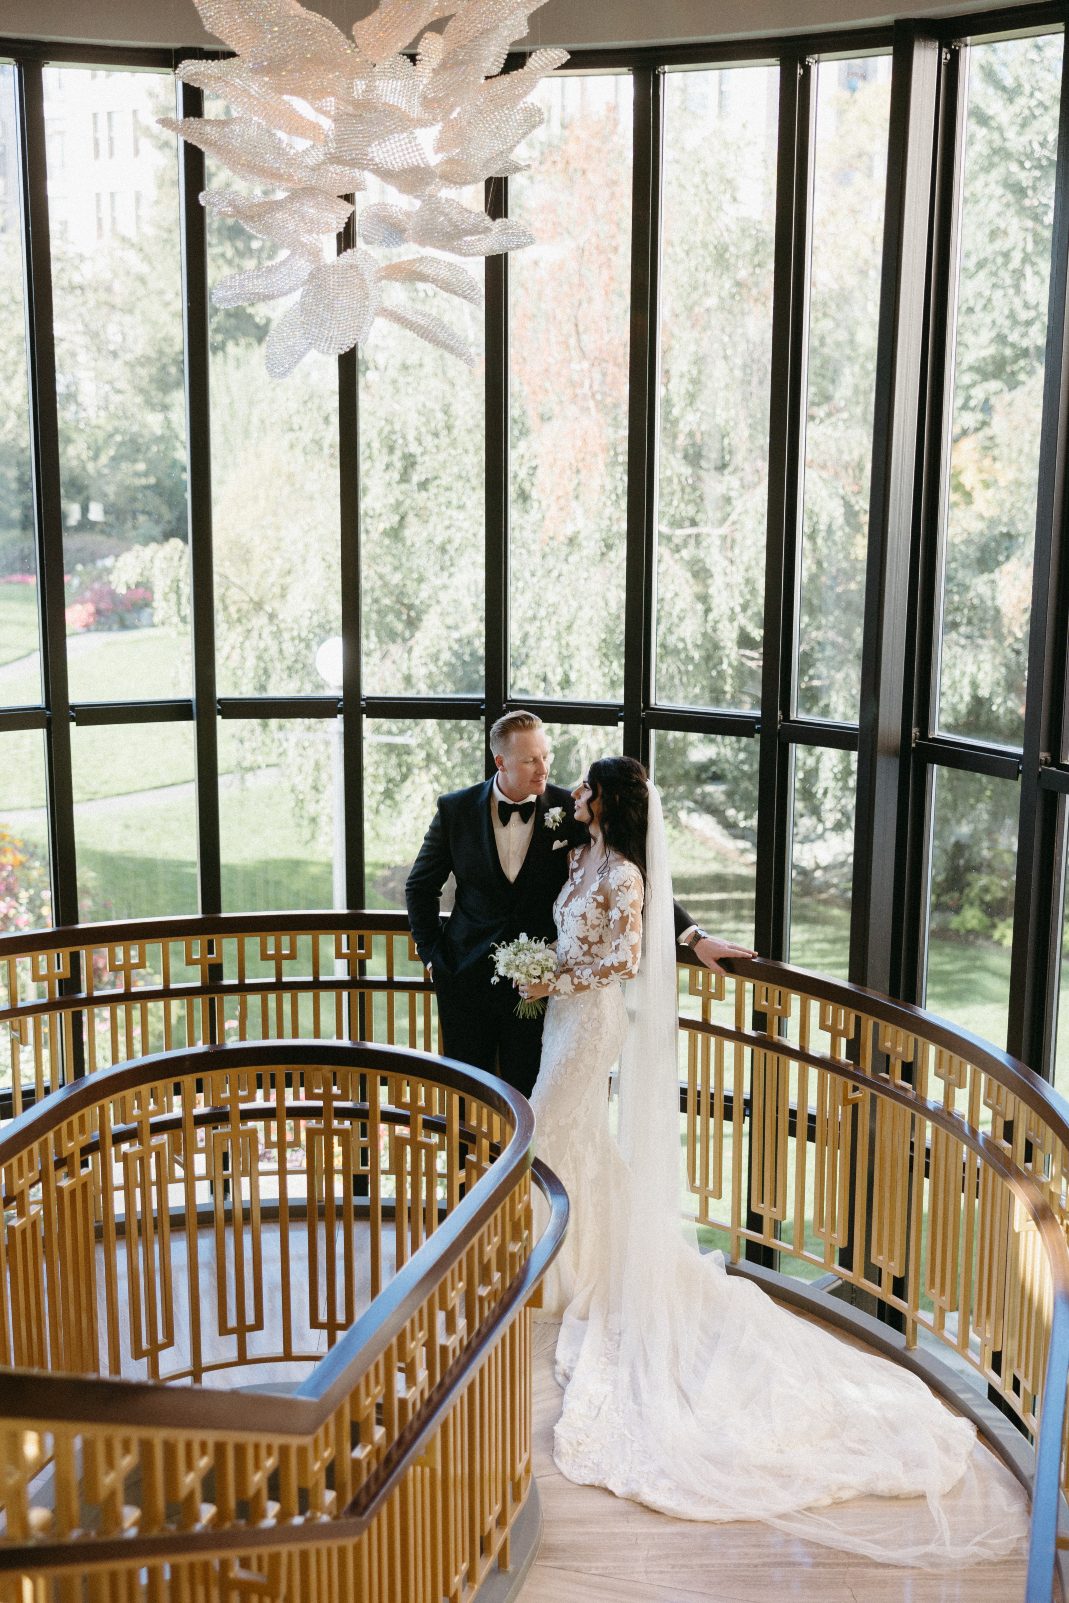 The beautiful couple gazing lovingly at each other on the landing of a cool curved staircase at the Fairmont Empress